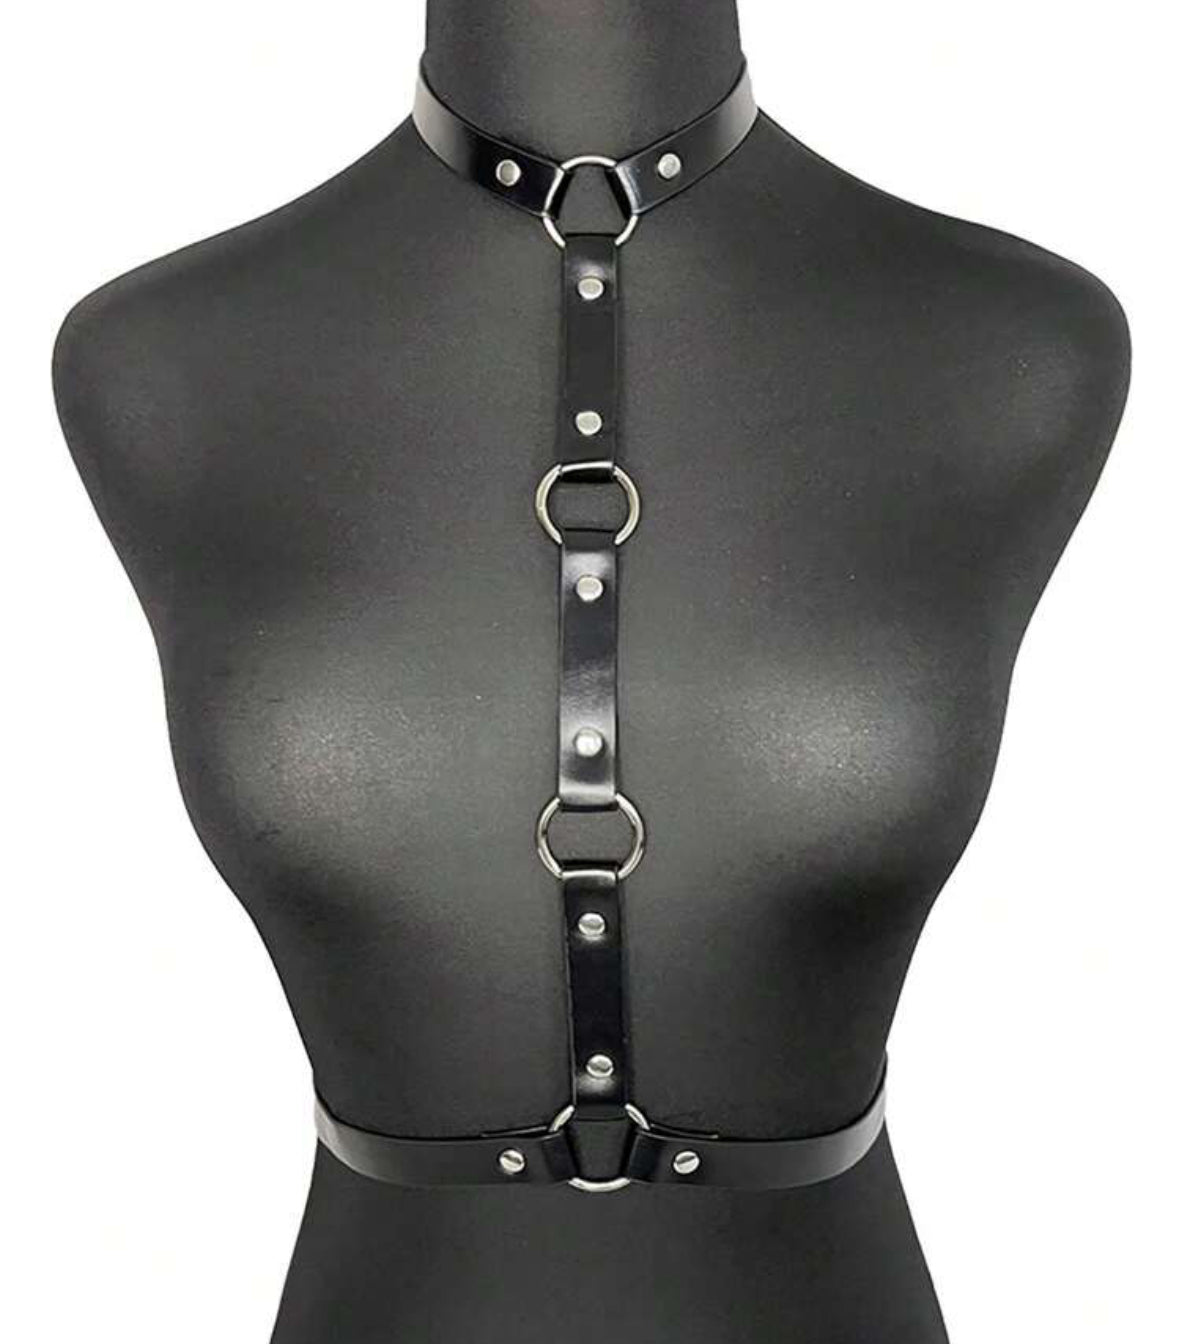 A - A Chest harness